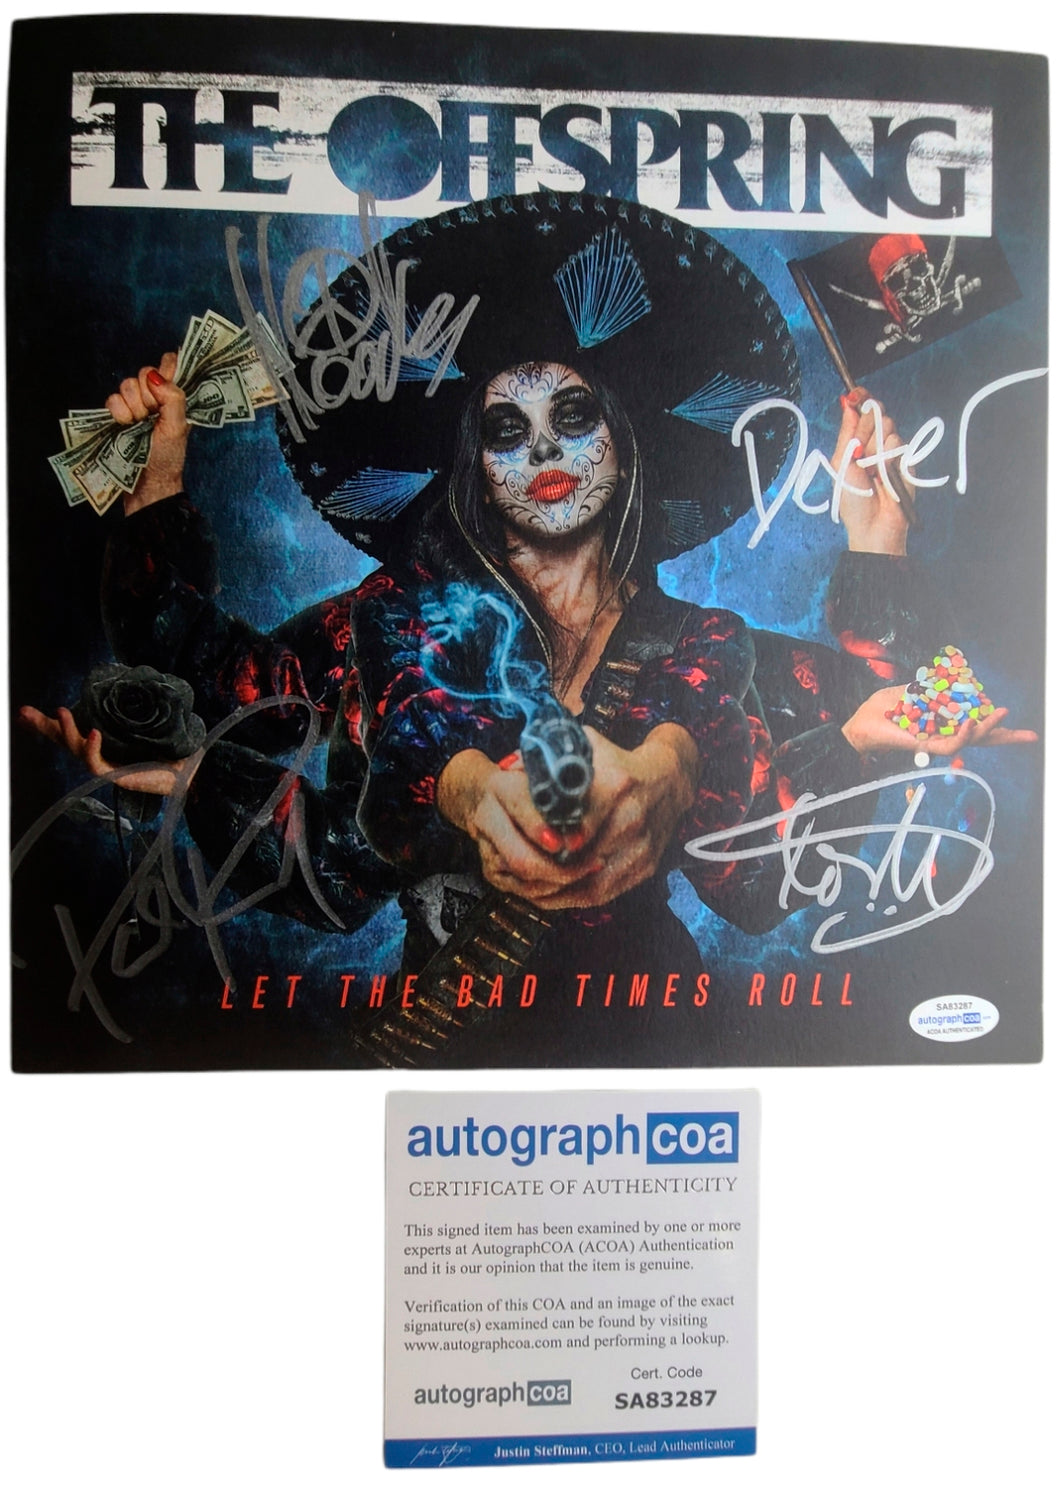 The Offspring Let The Bad Times Roll Autographed Album